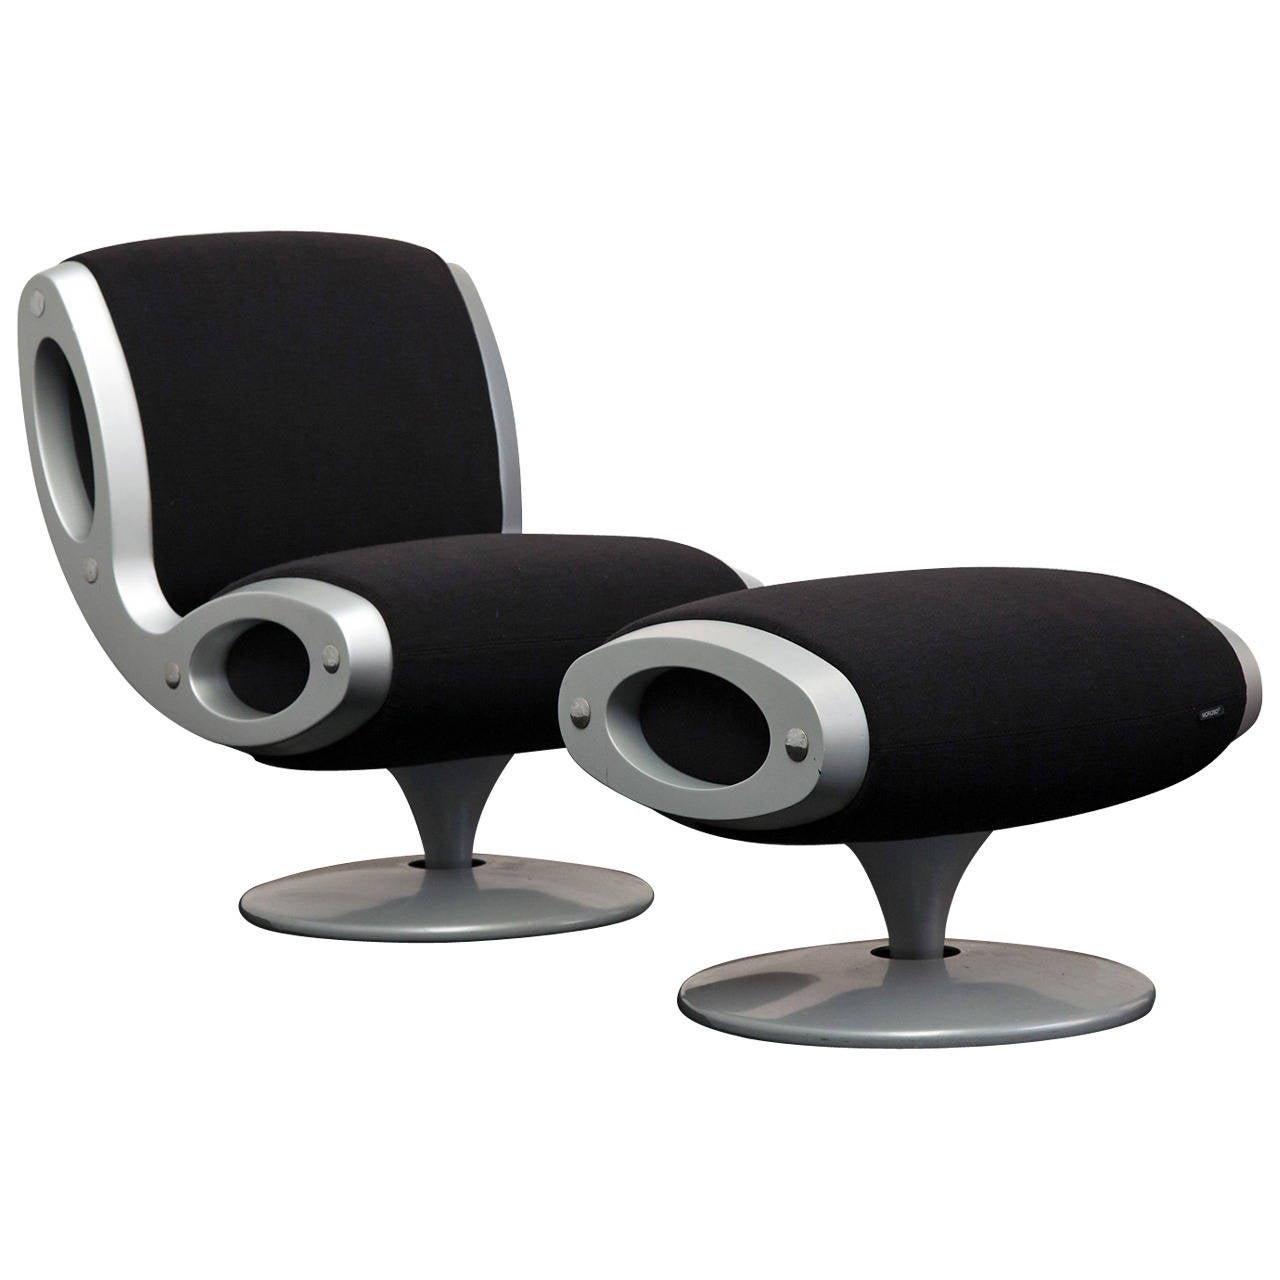 Marc Newson Gluon Chair and Ottoman, Original Moroso Labeled "1993" For Sale